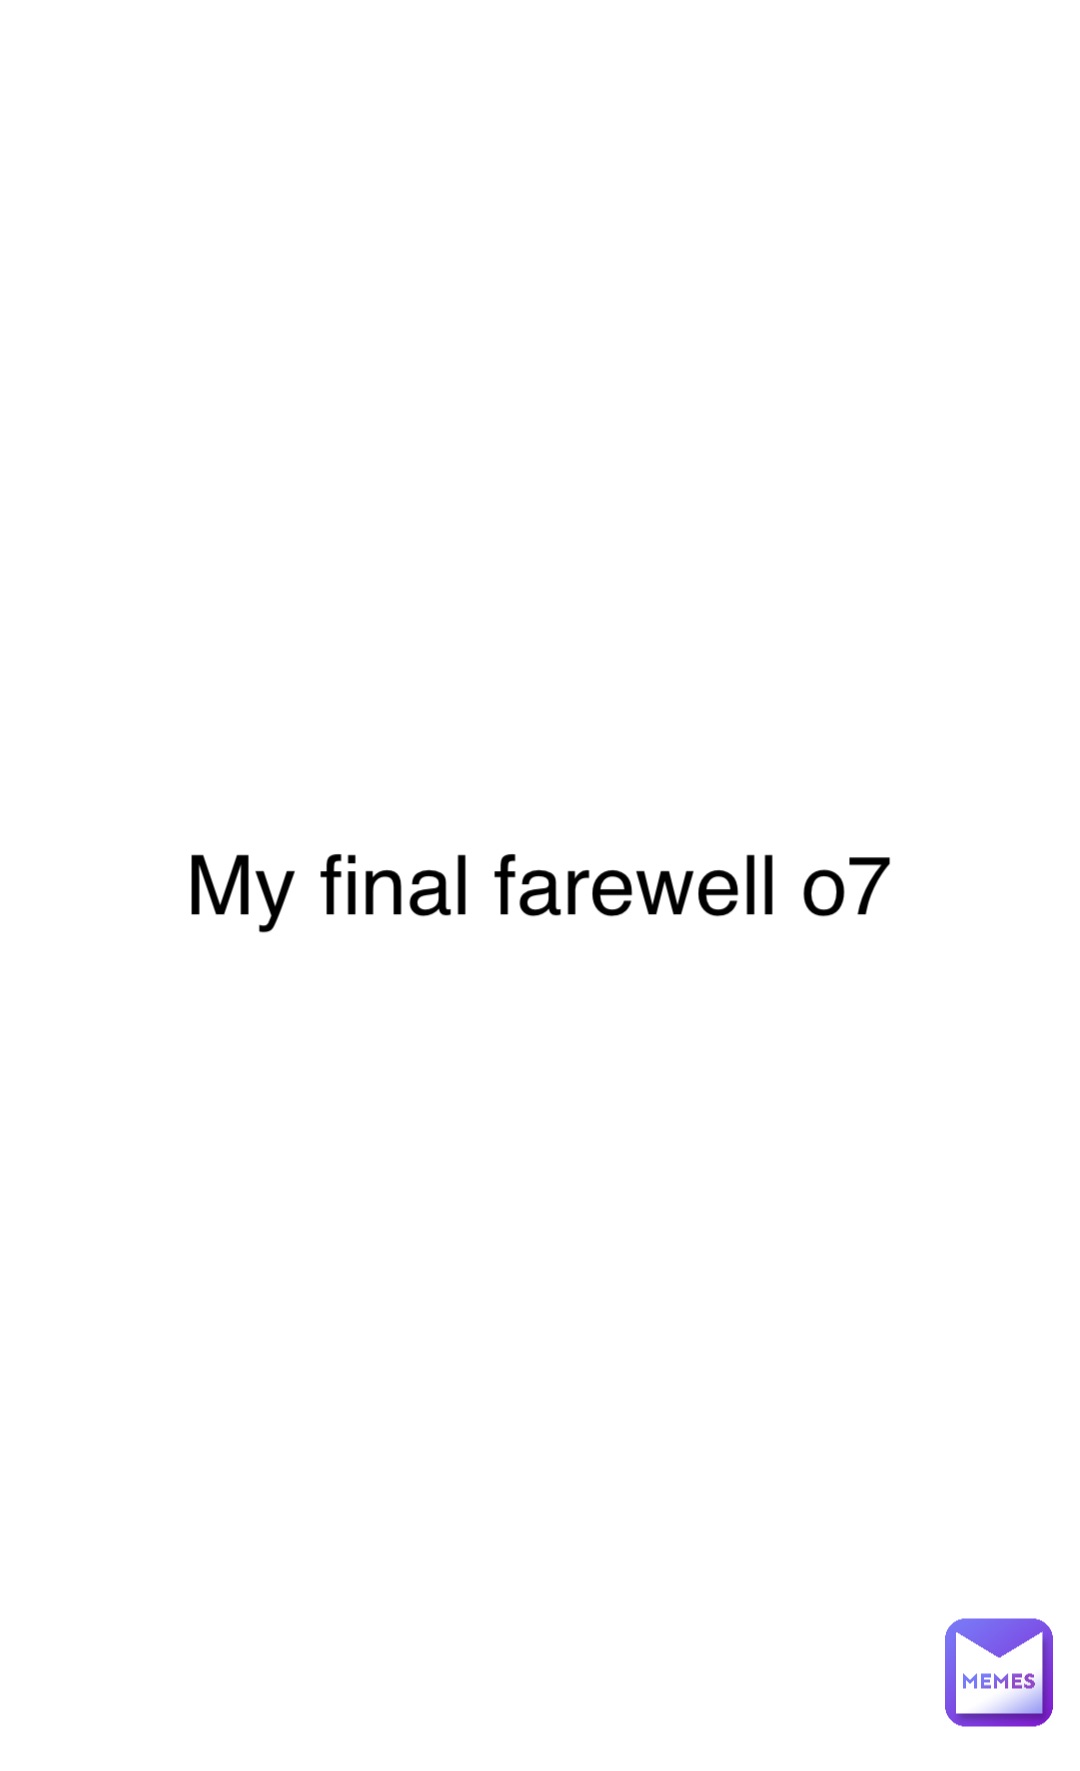 Double tap to edit My final farewell o7